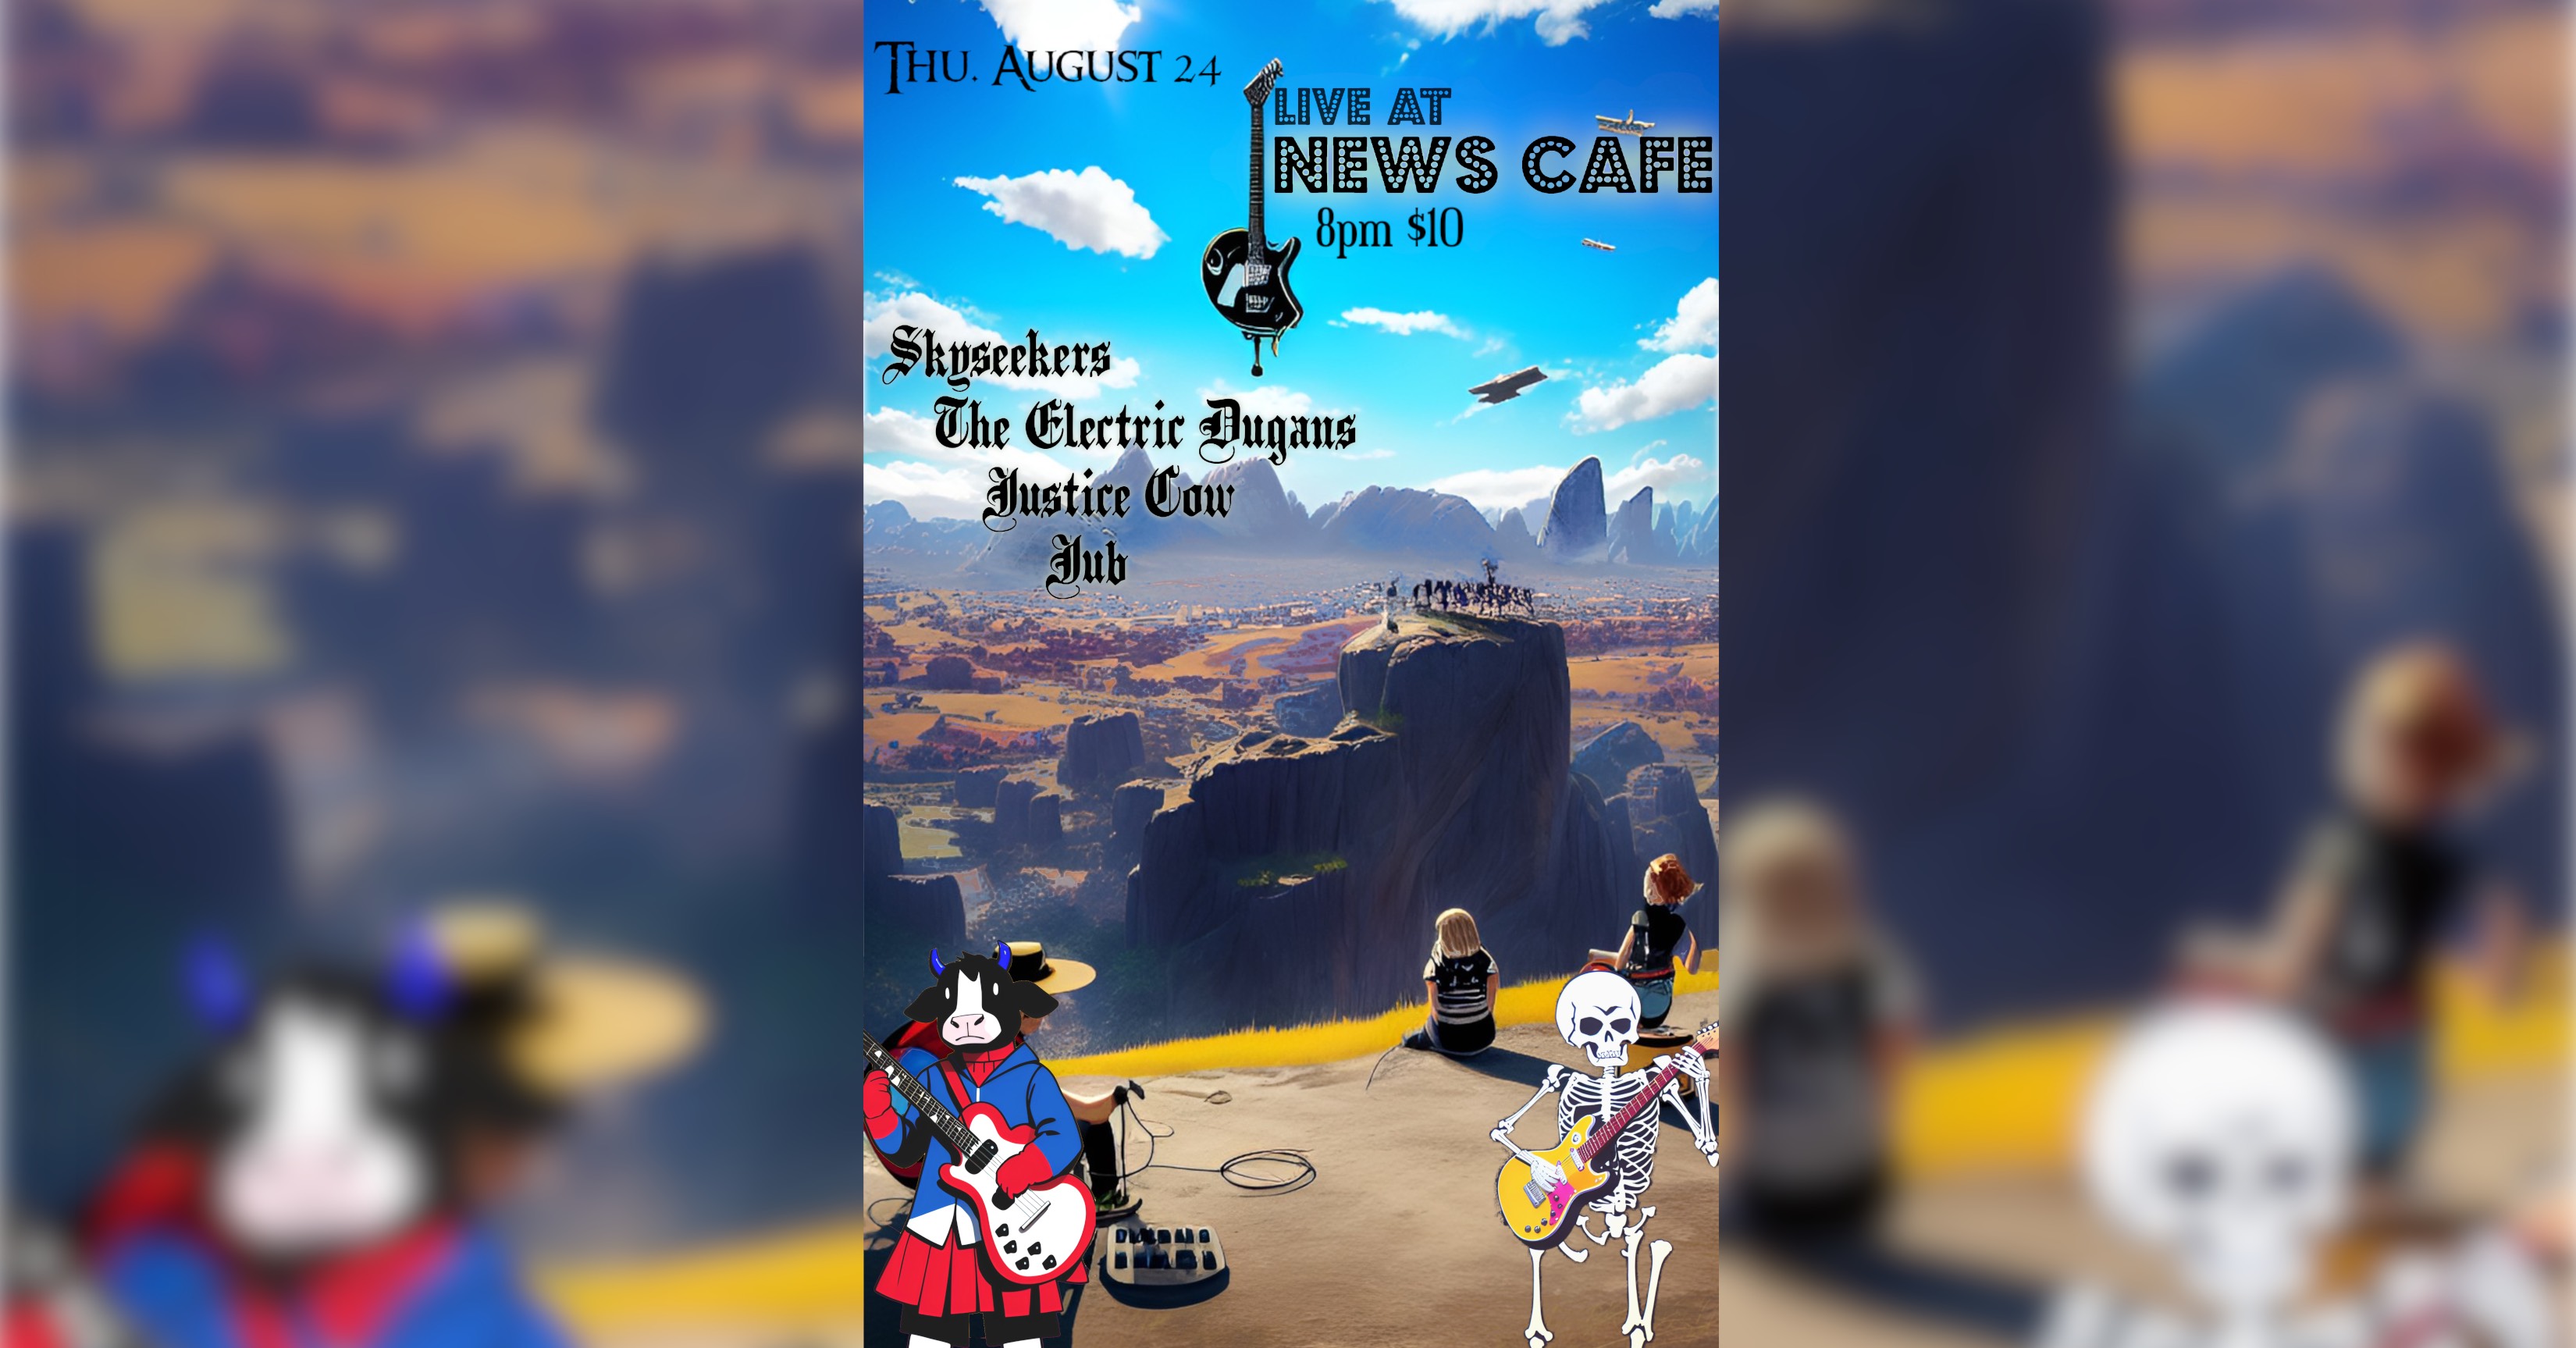 Thursday, August 24 live at News Cafe, 8 pm, $10 with Skyseekers, The Electric Dugans, Justice Cow, and Jub